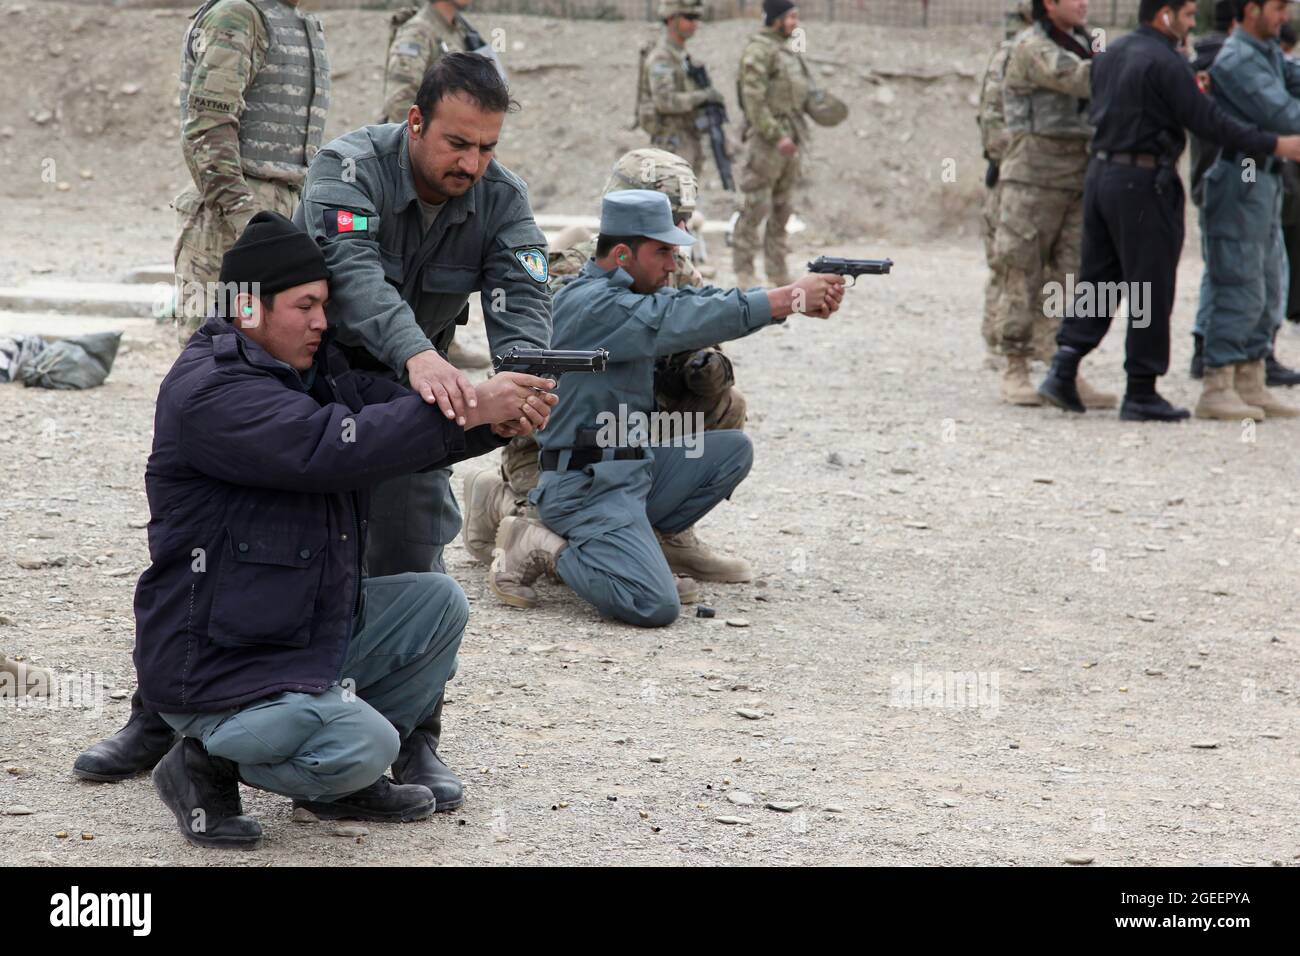 Afghan Uniformed Policemen, stationed in Khost city, help each other improve their skills while firing M-9 Beretta pistols on a small arms range on Camp Parsa, Khowst province, Afghanistan, Jan. 30, 2013. U.S. Army Soldiers assigned to Security Forces Advise and Assist Team 28, Task Force 3/101, planned the range and assisted the AUP with safely practicing with their weapons. (U.S. Army photo by Sgt. Kimberly Trumbull / Released) Stock Photo